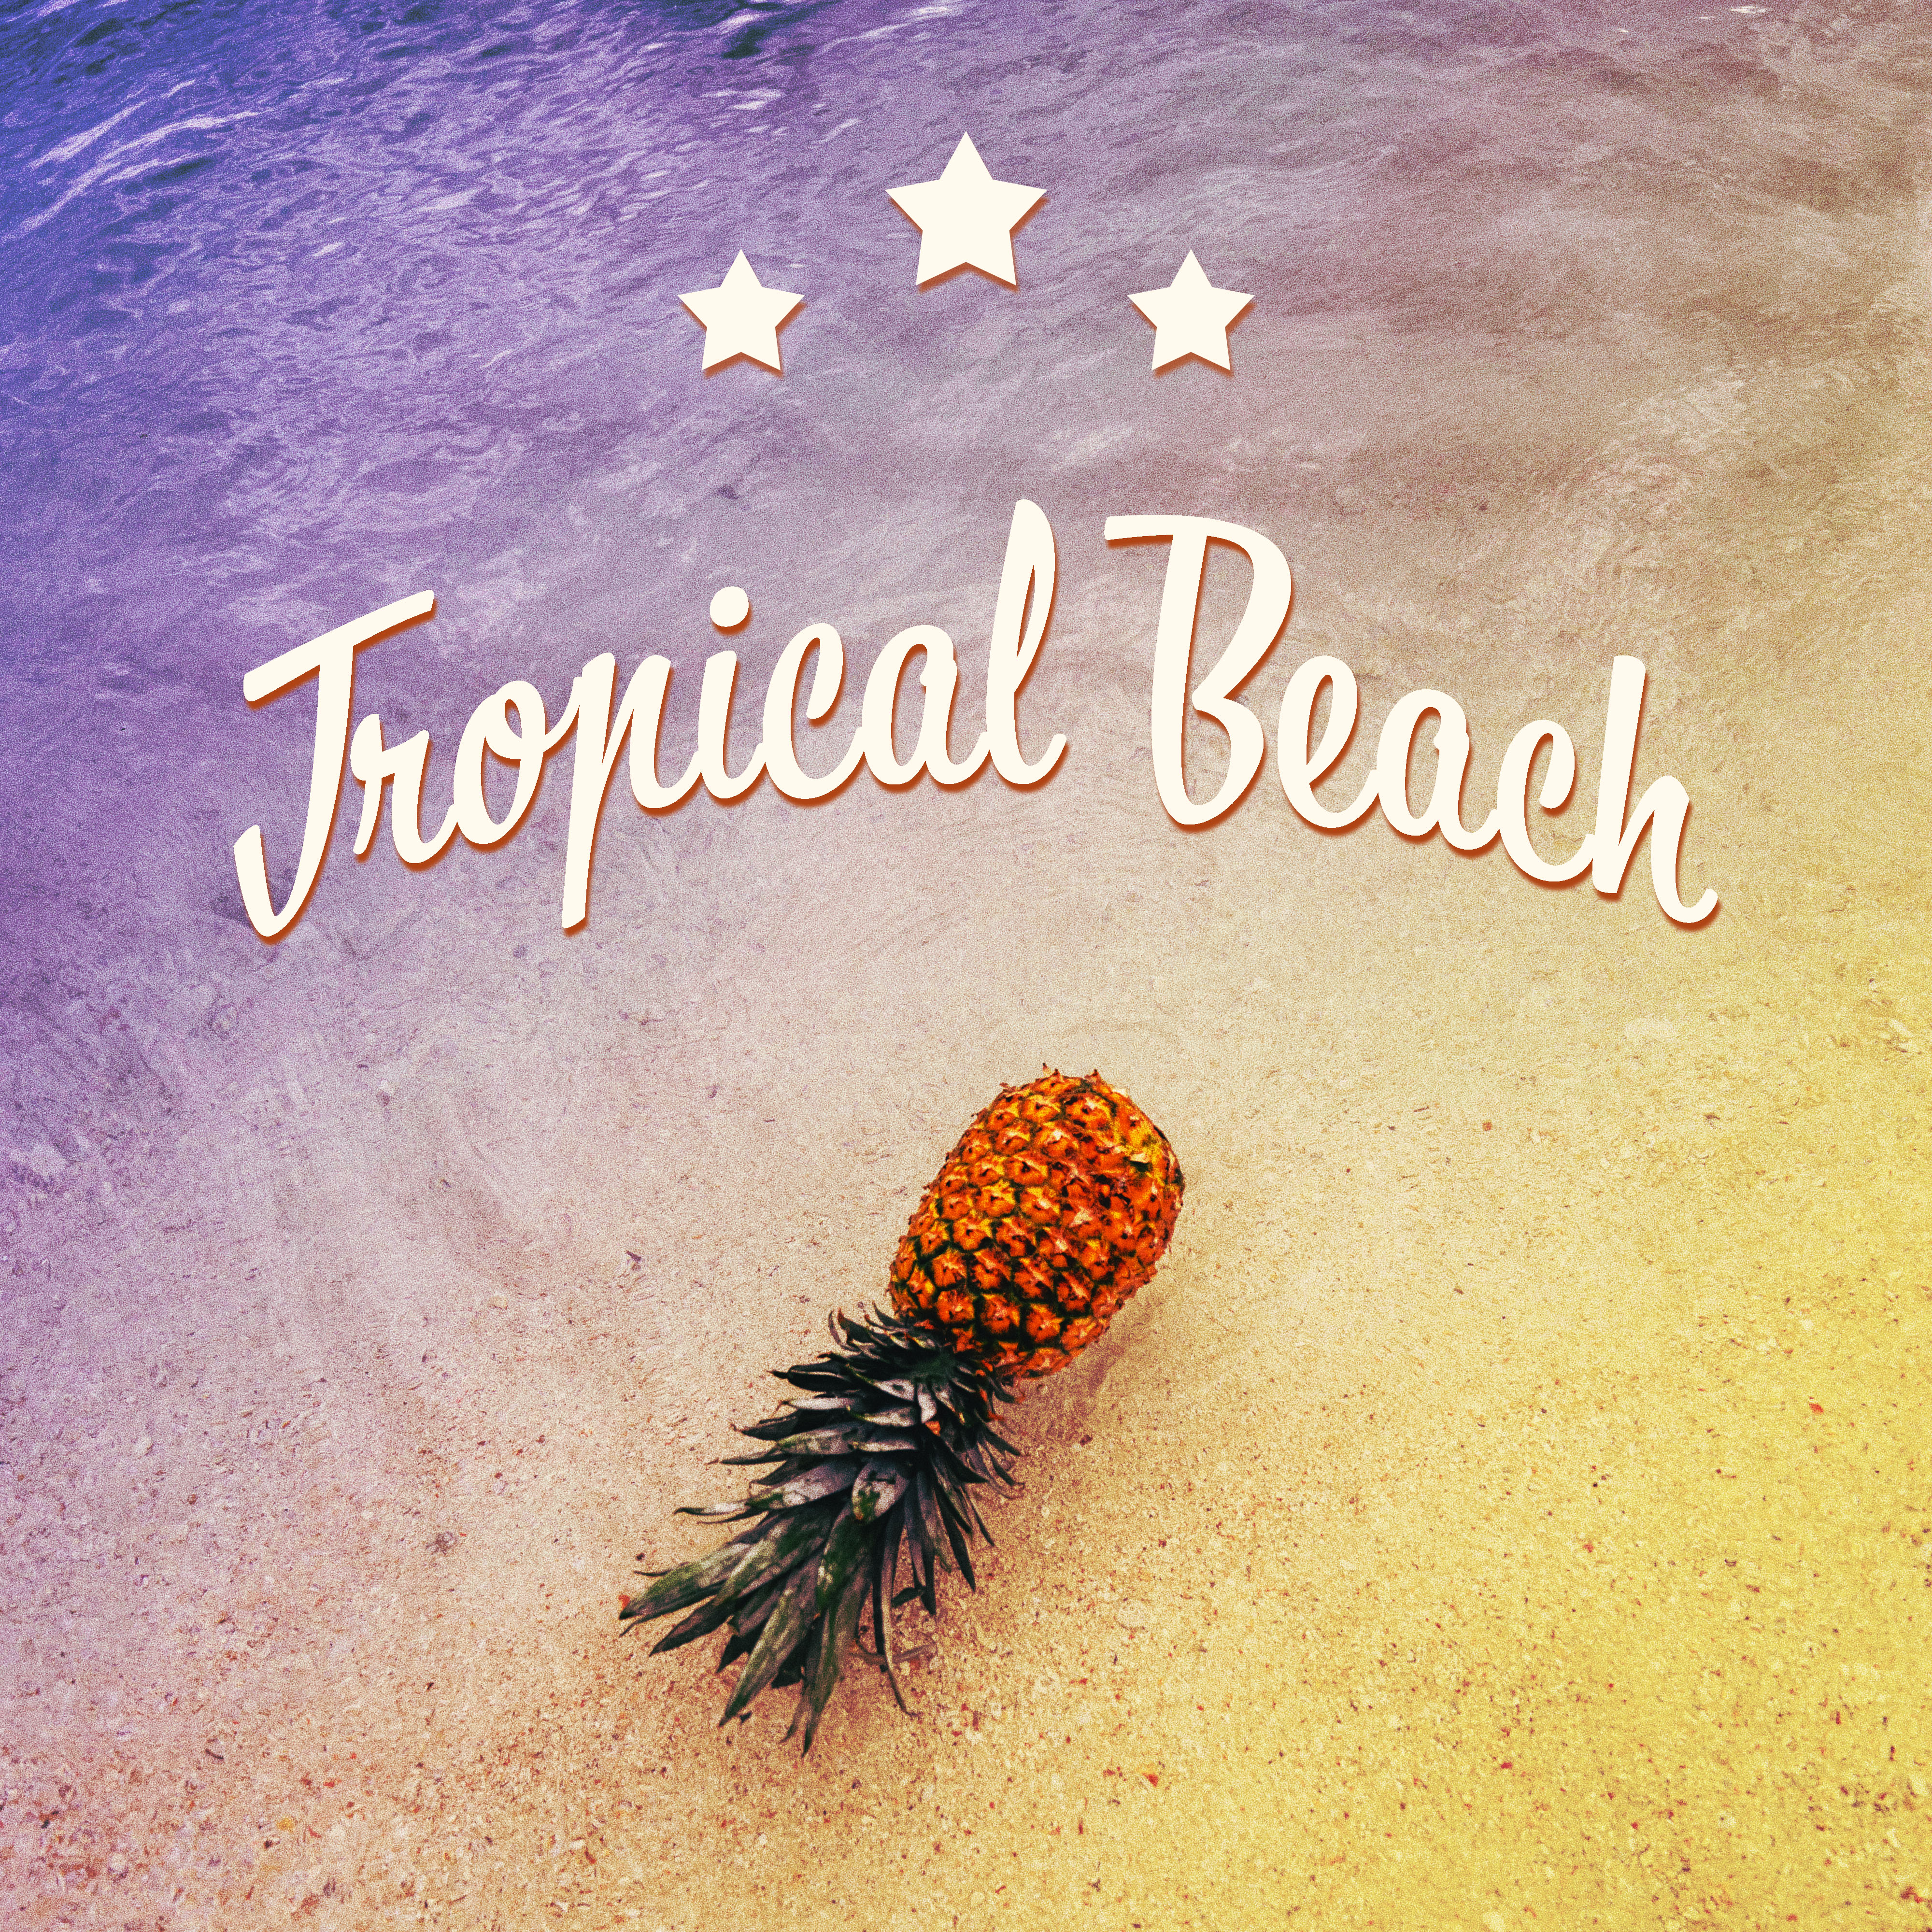 Tropical Beach  Holiday Chill Out Music, Relax, Summer Lounge, Beach Chill, Tropical Sounds, Pure Rest